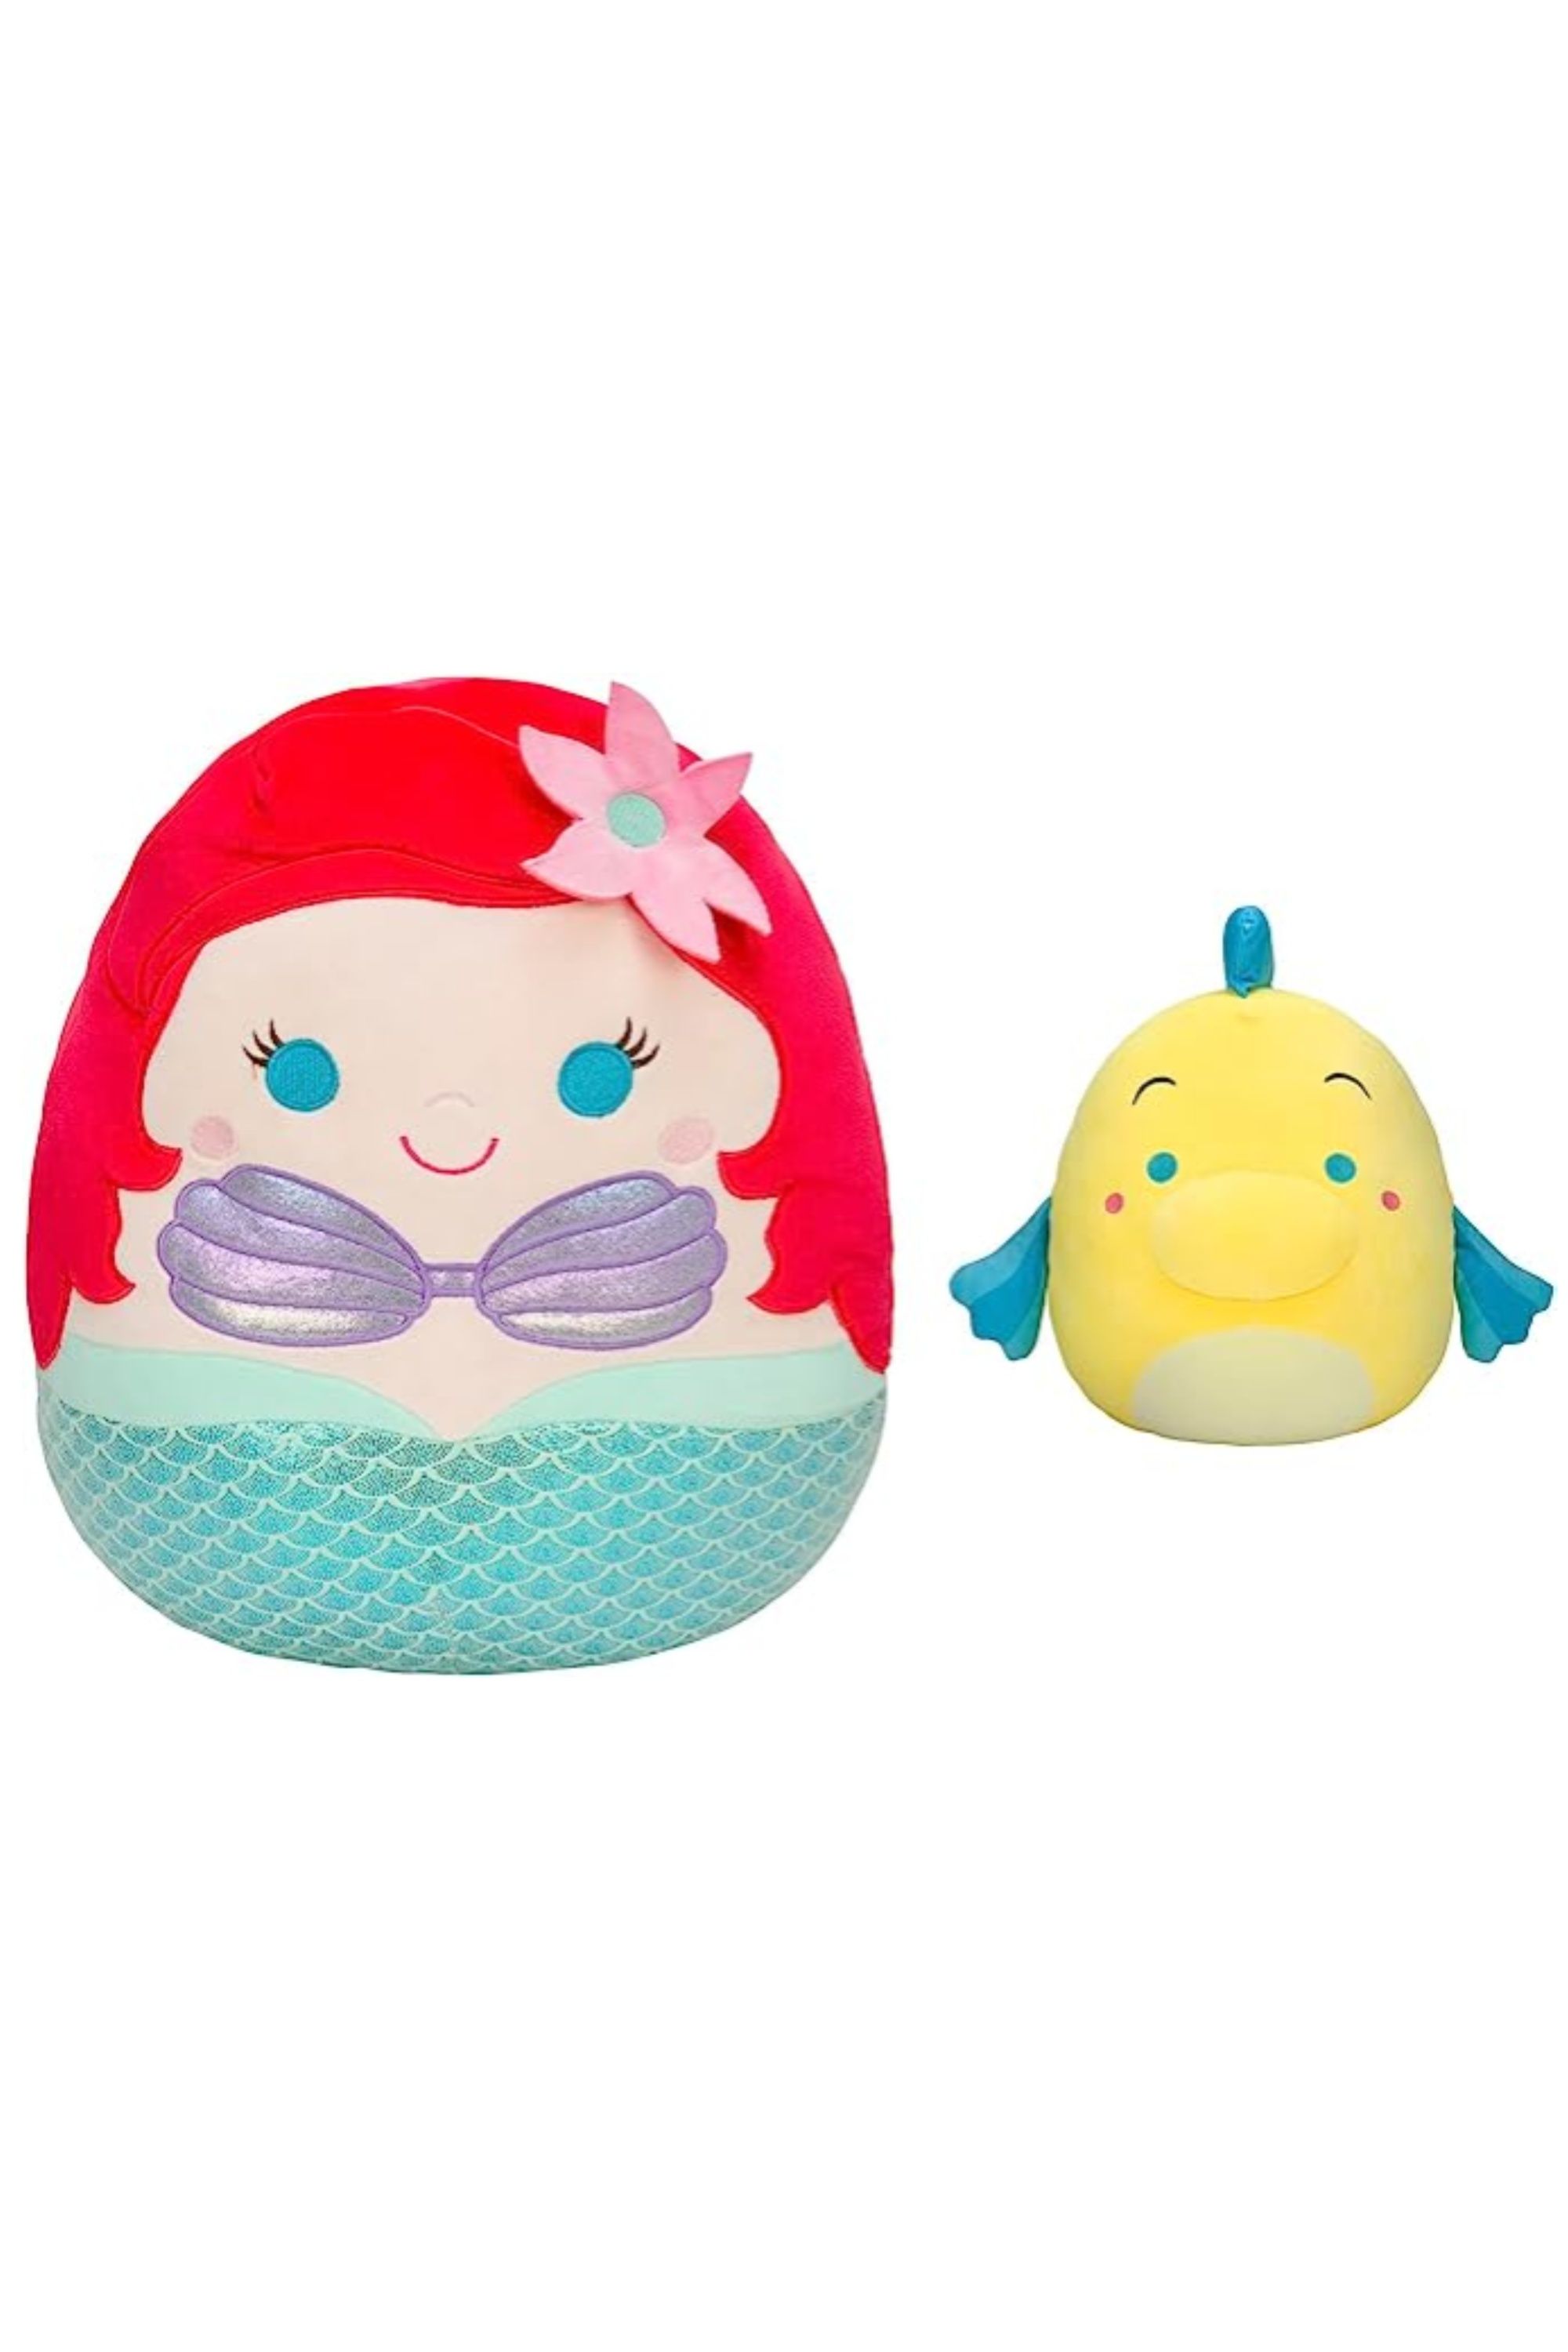 Squishmallows Original Disney 10-inch Ariel and 4-inch Flounder 2-pack plushies